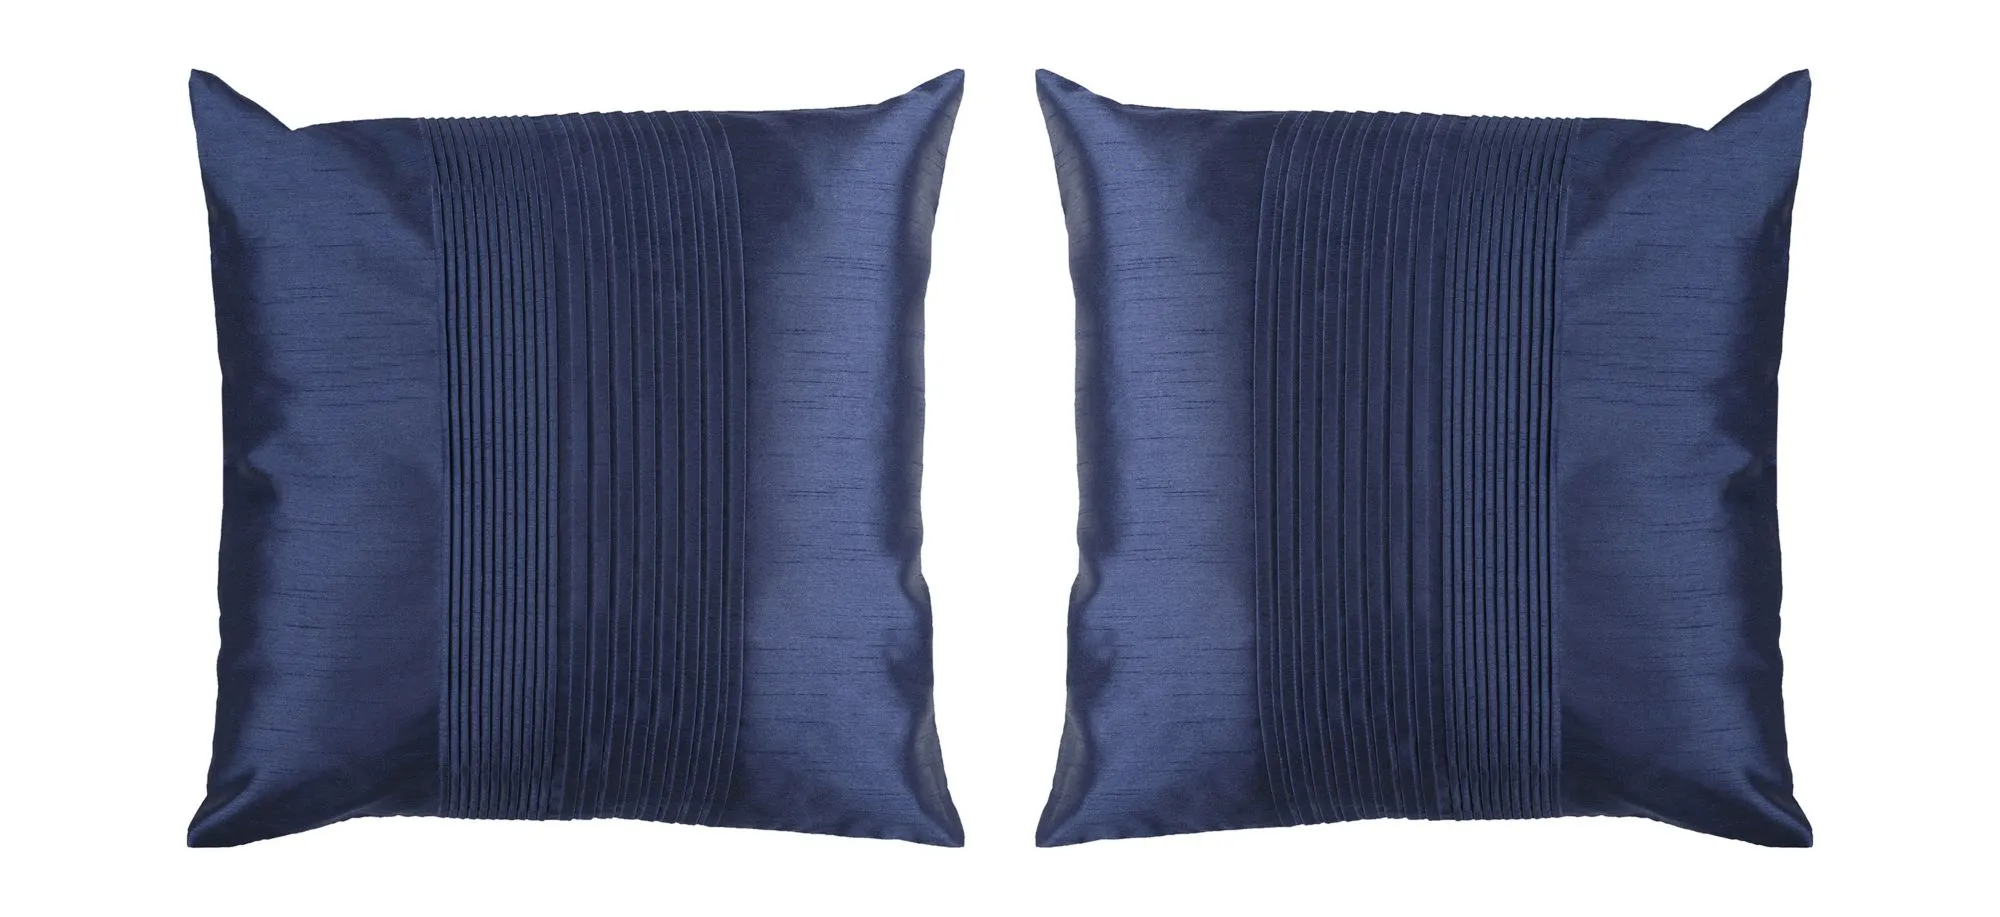 Solid Pleated 18" Down Throw Pillow Set - 2 Pc. in Navy by Surya